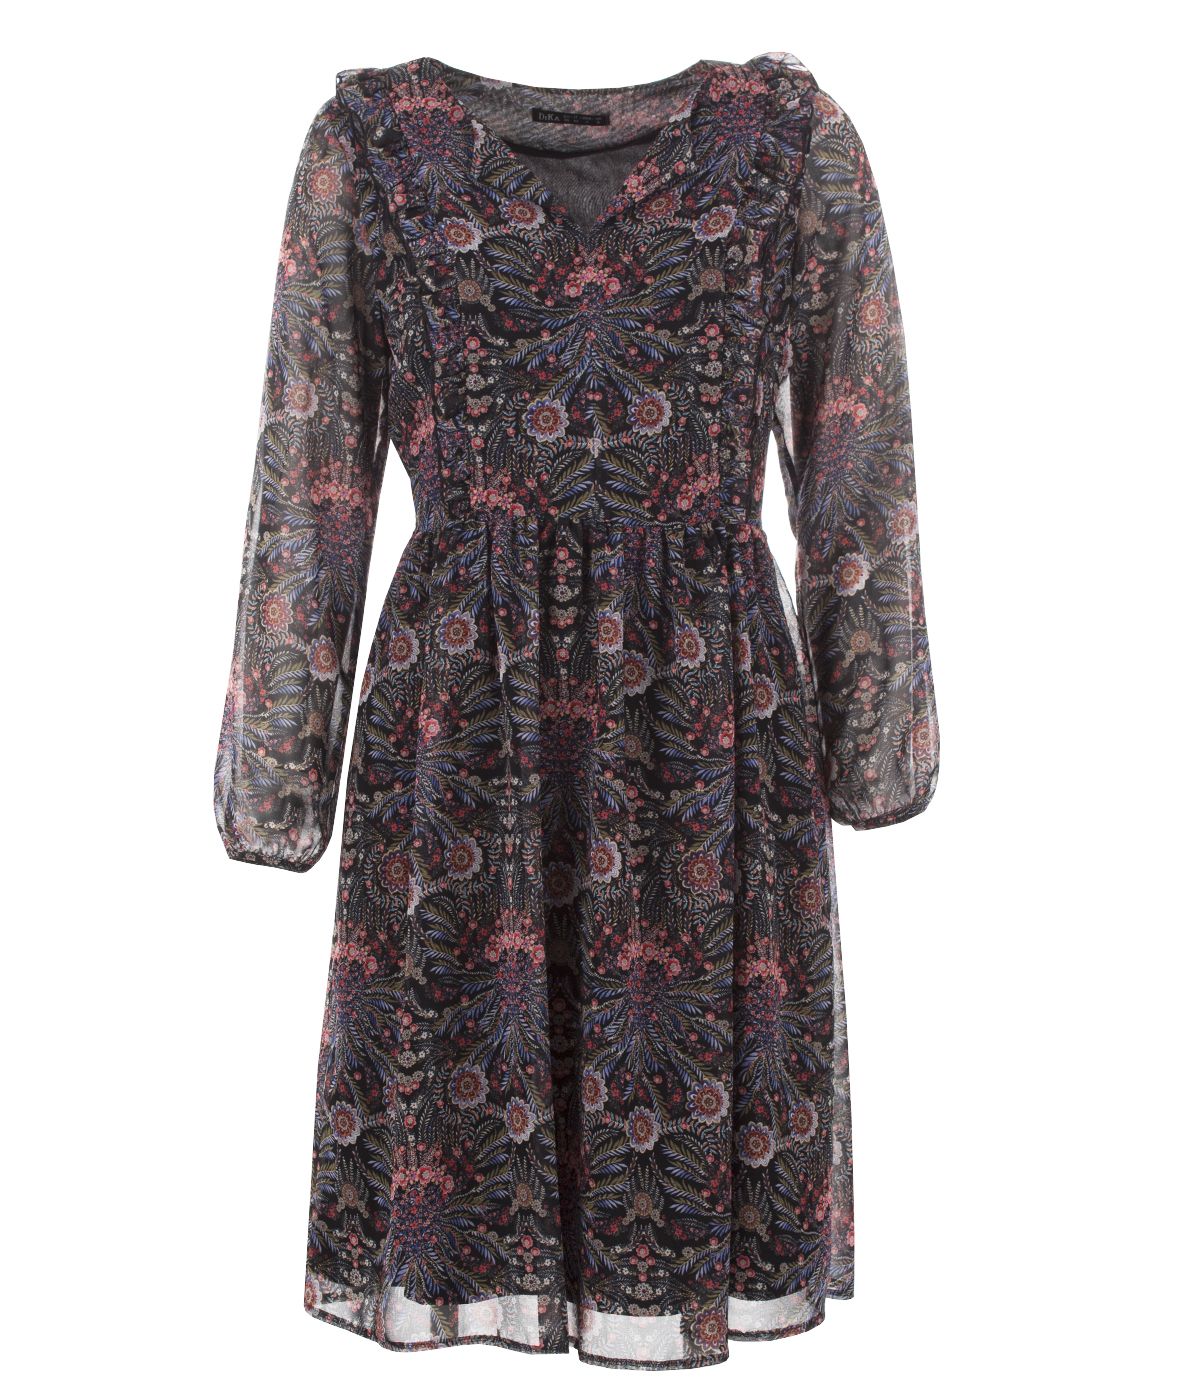 Chiffon dress with long sleeves, emphasized waist, with paisley print  0